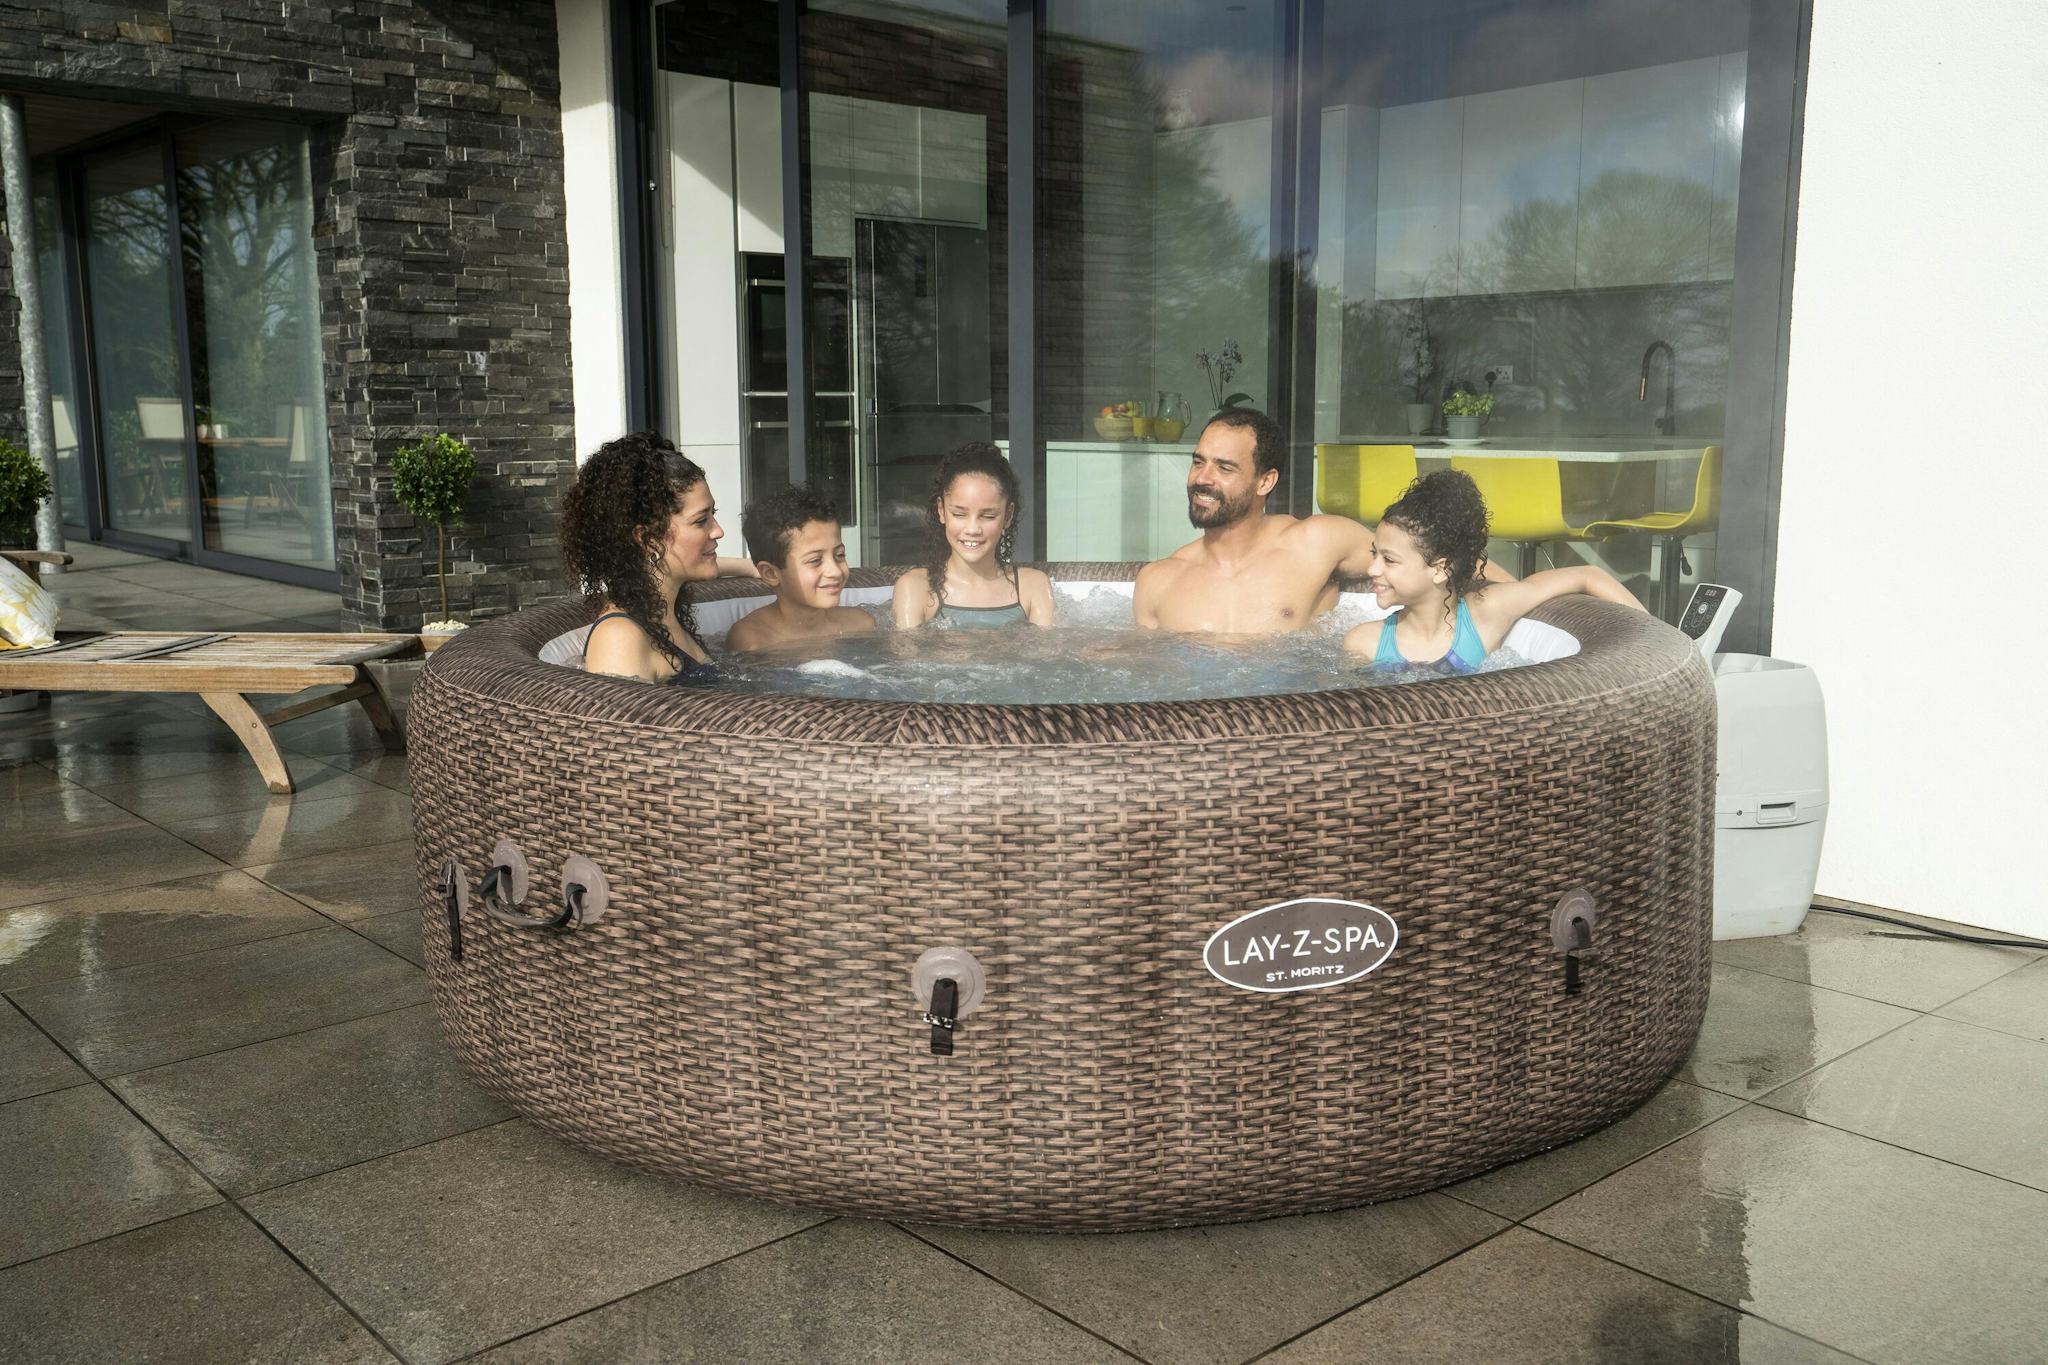 Spas Gonflables Spa gonflable rond Lay-Z-Spa® St Moritz Airjet™ 5 - 7 personnes Bestway 6